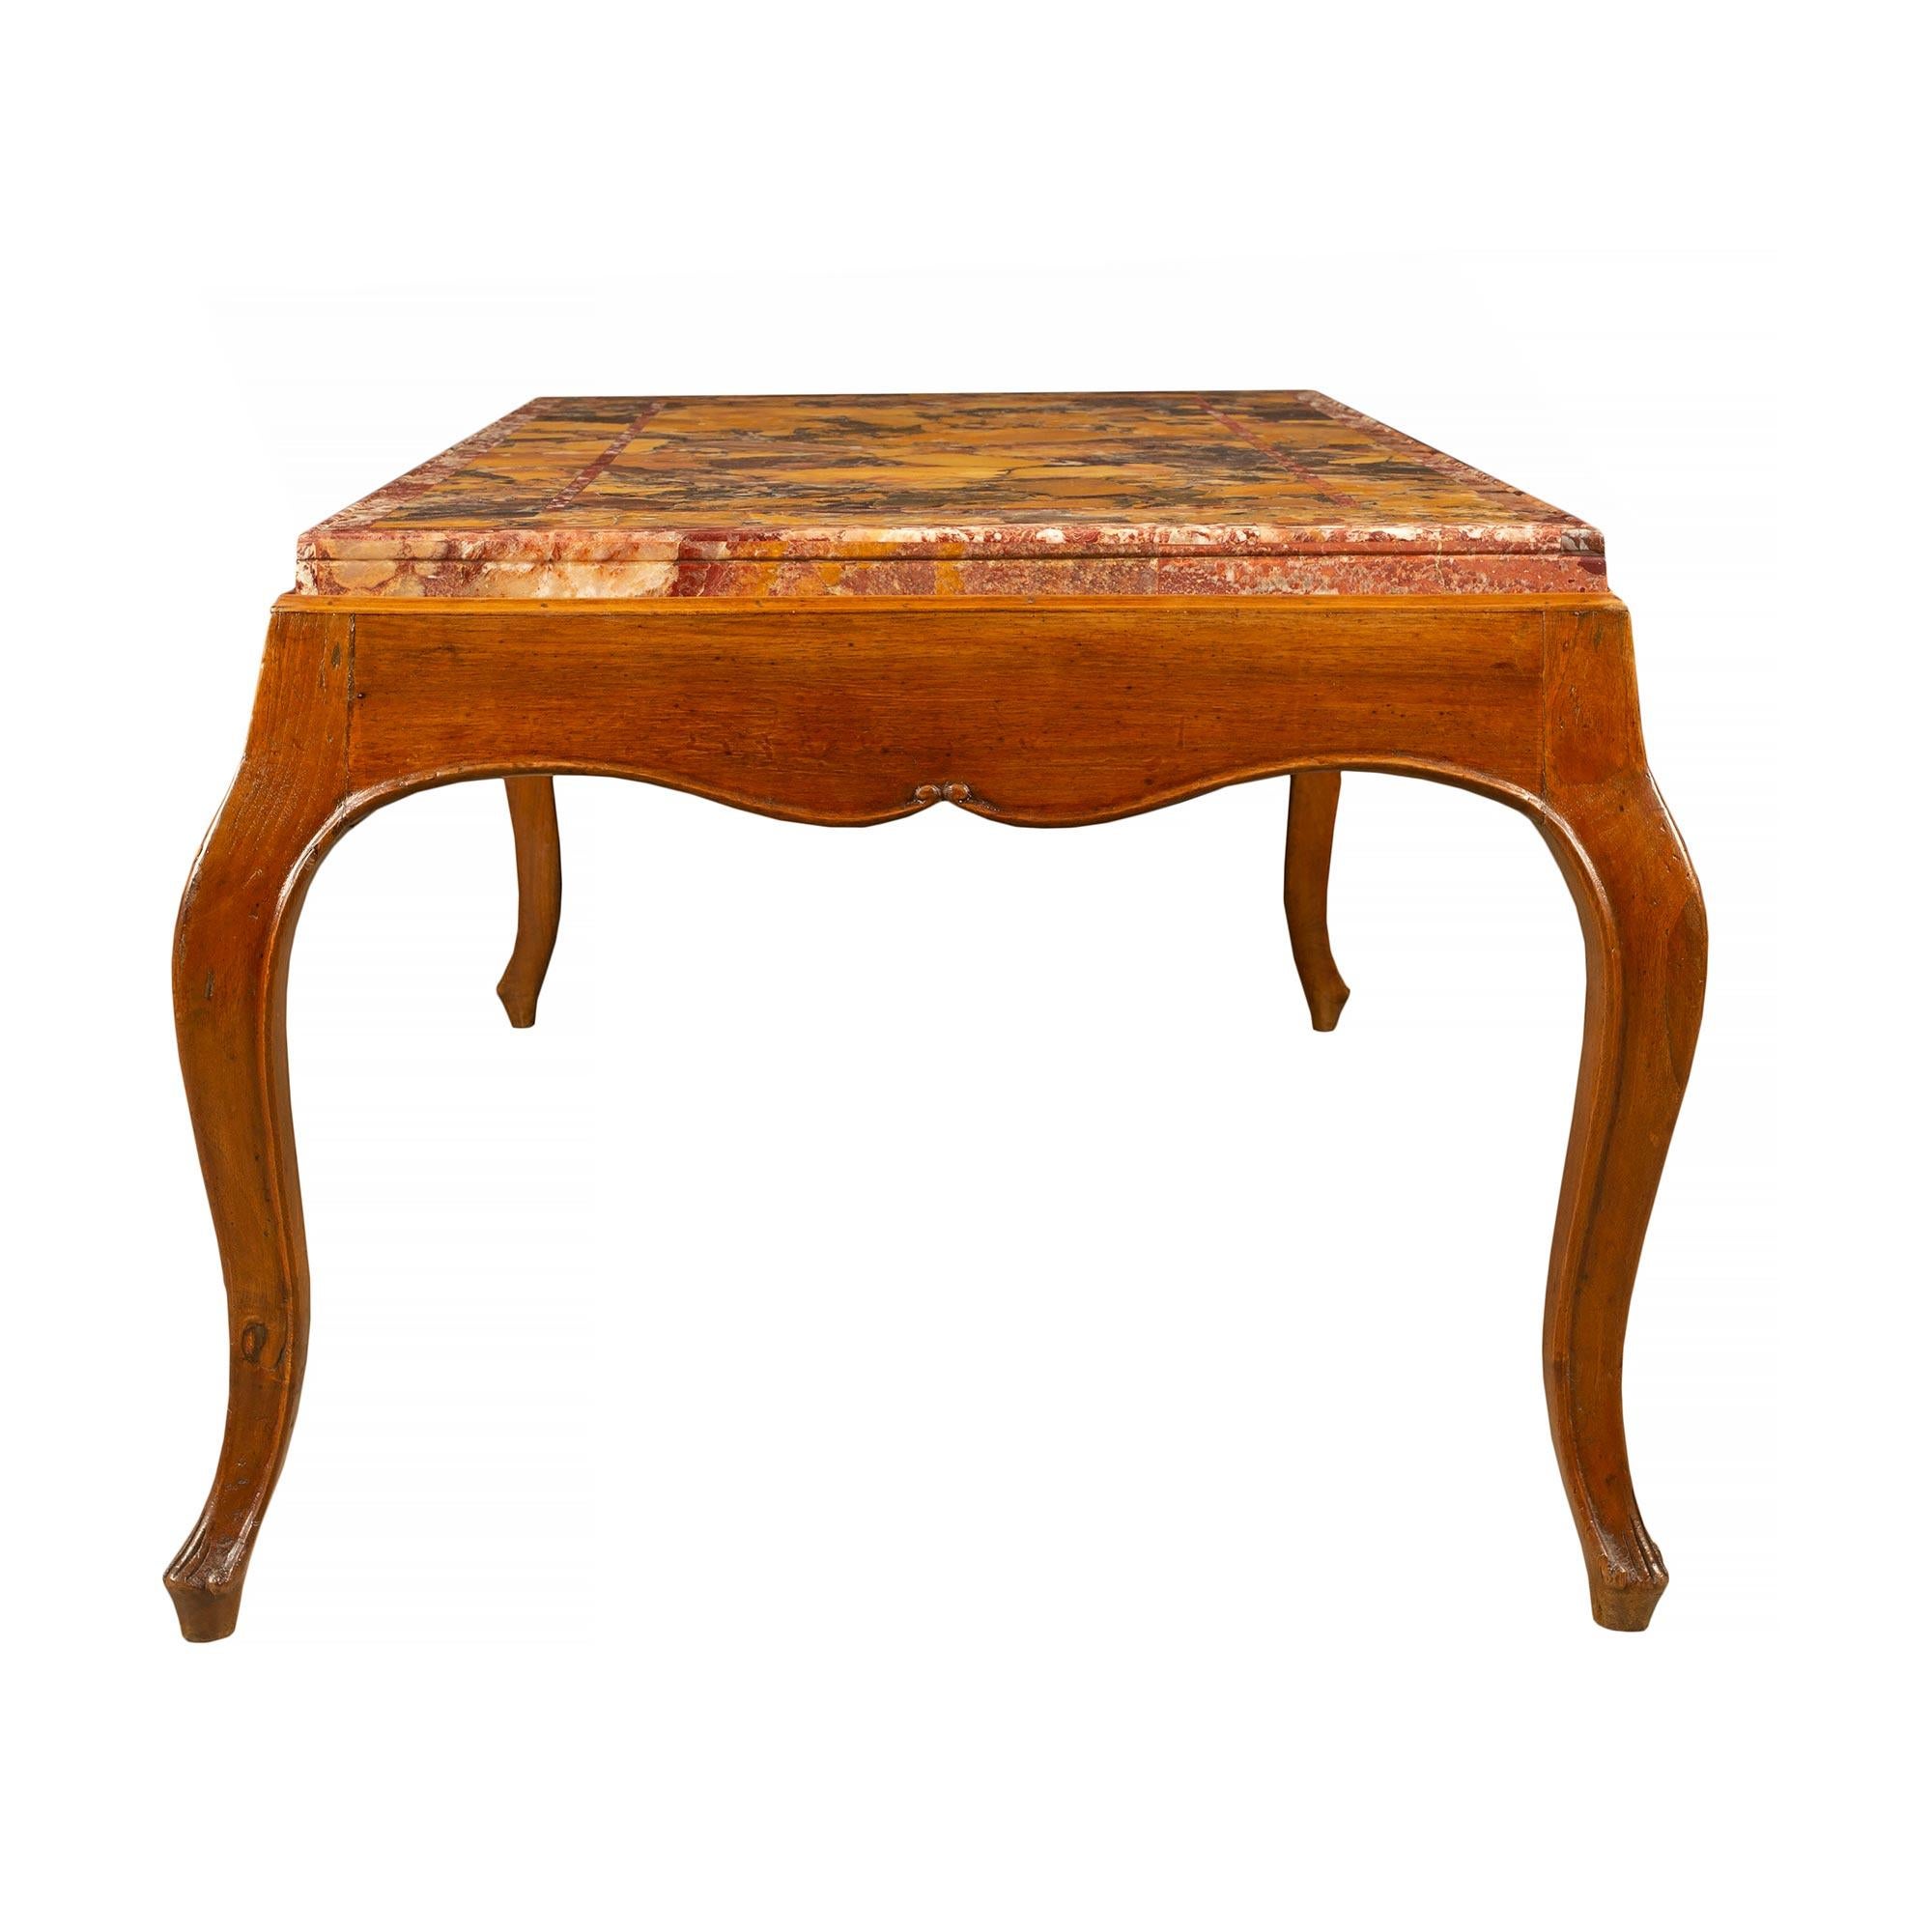 Italian 19th Century Louis XV Style Walnut and Marble Coffee Table For Sale 2